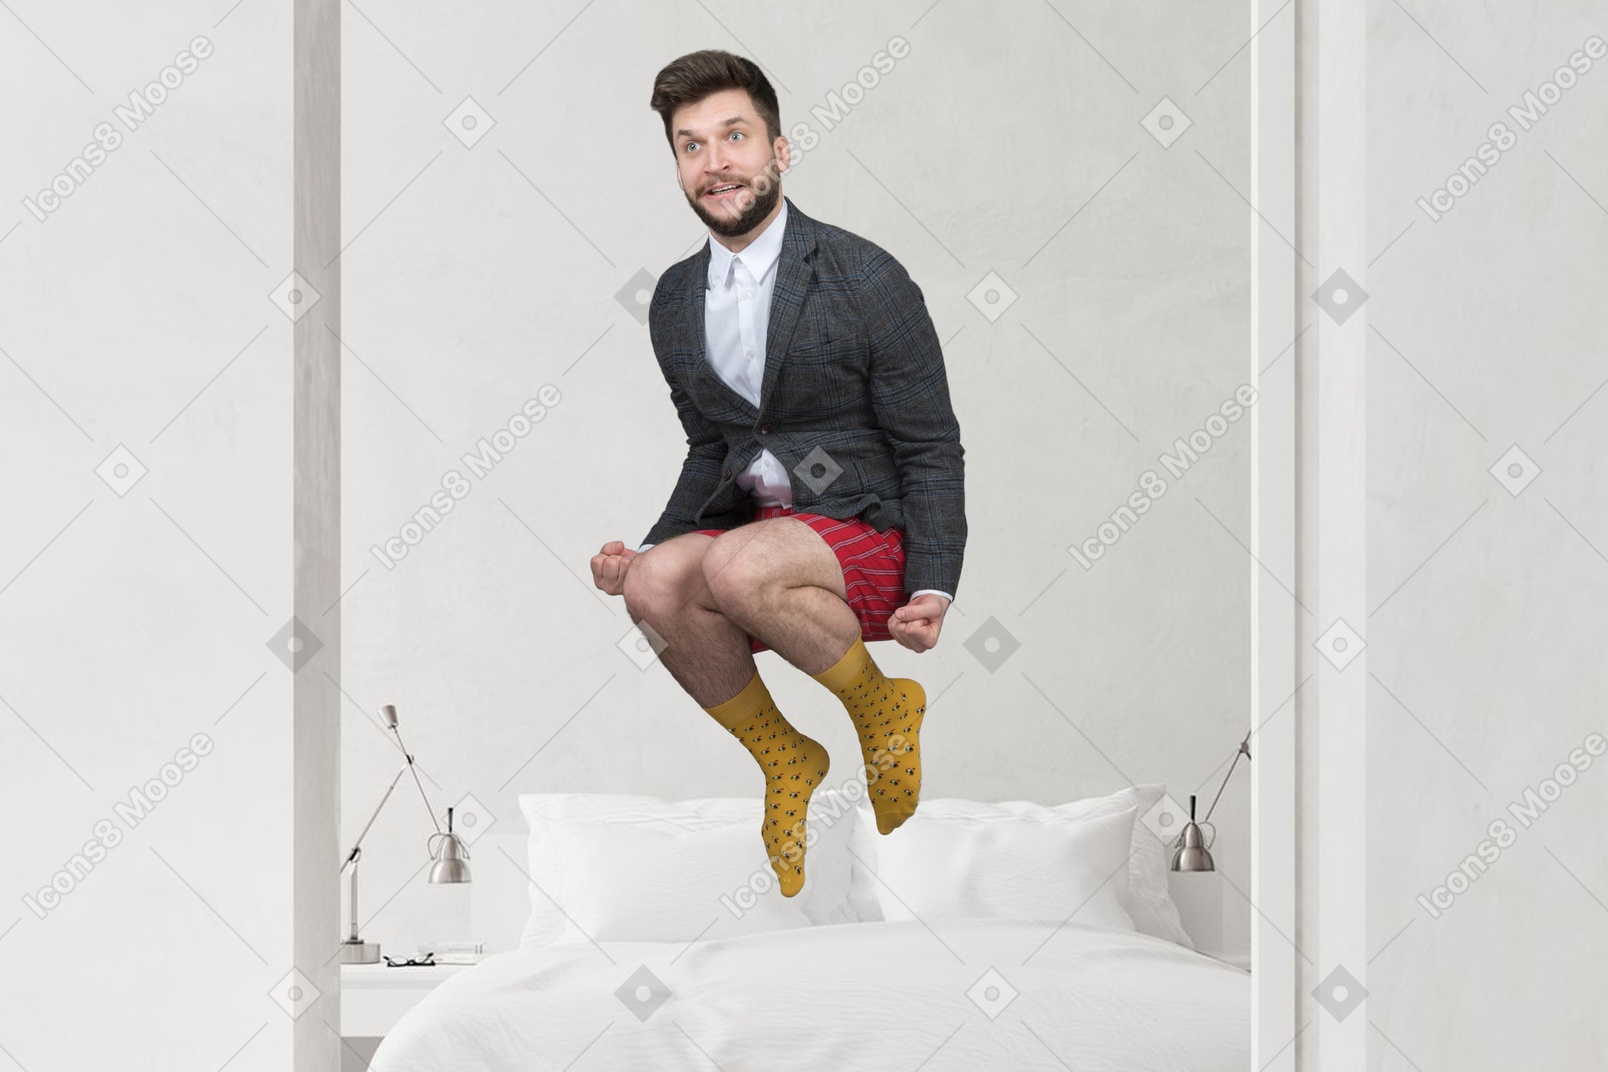 A man jumping on a bed